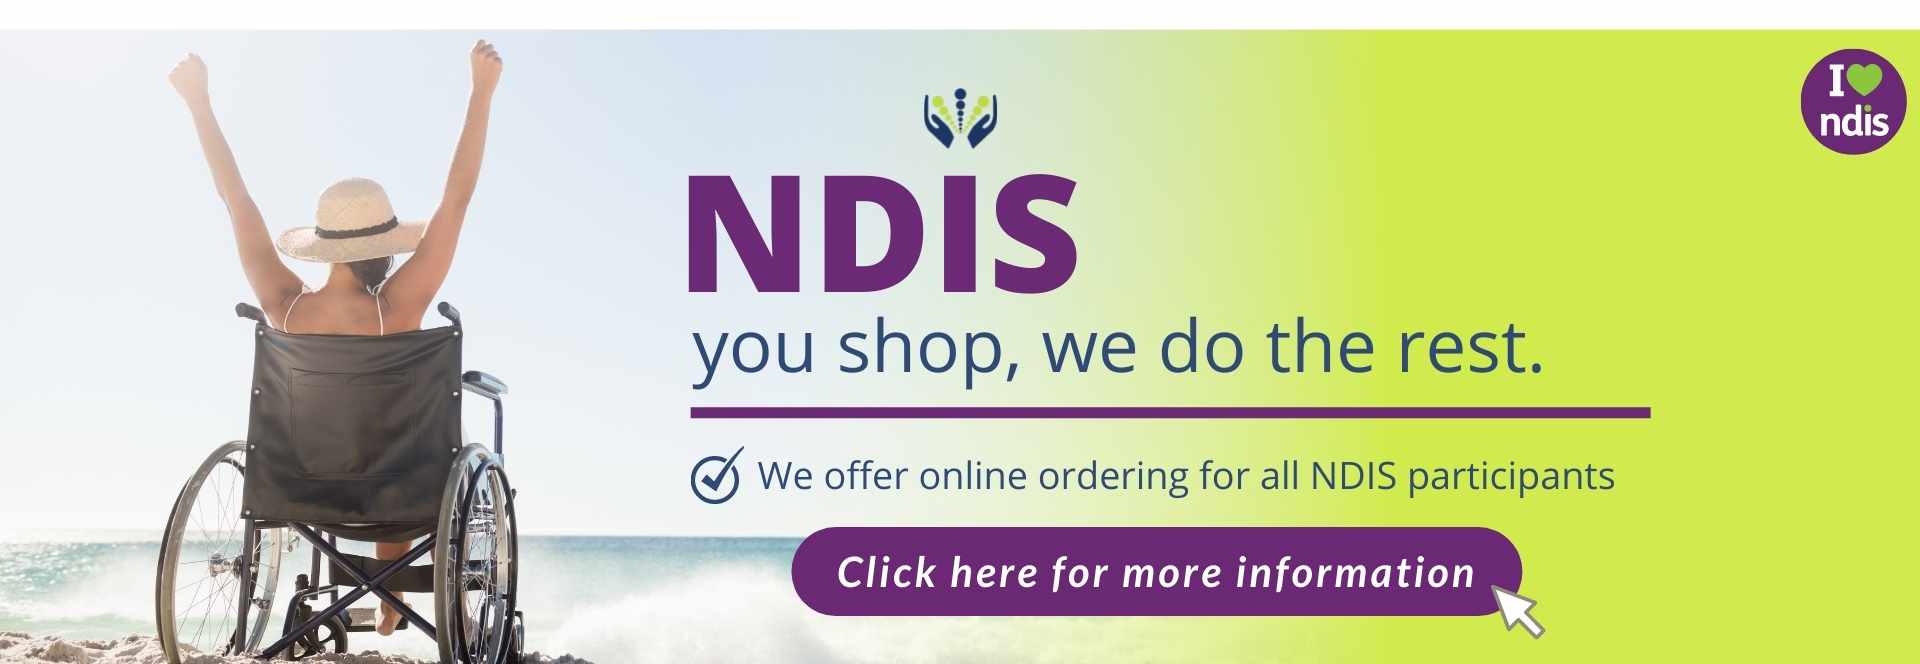 NDIS about banner